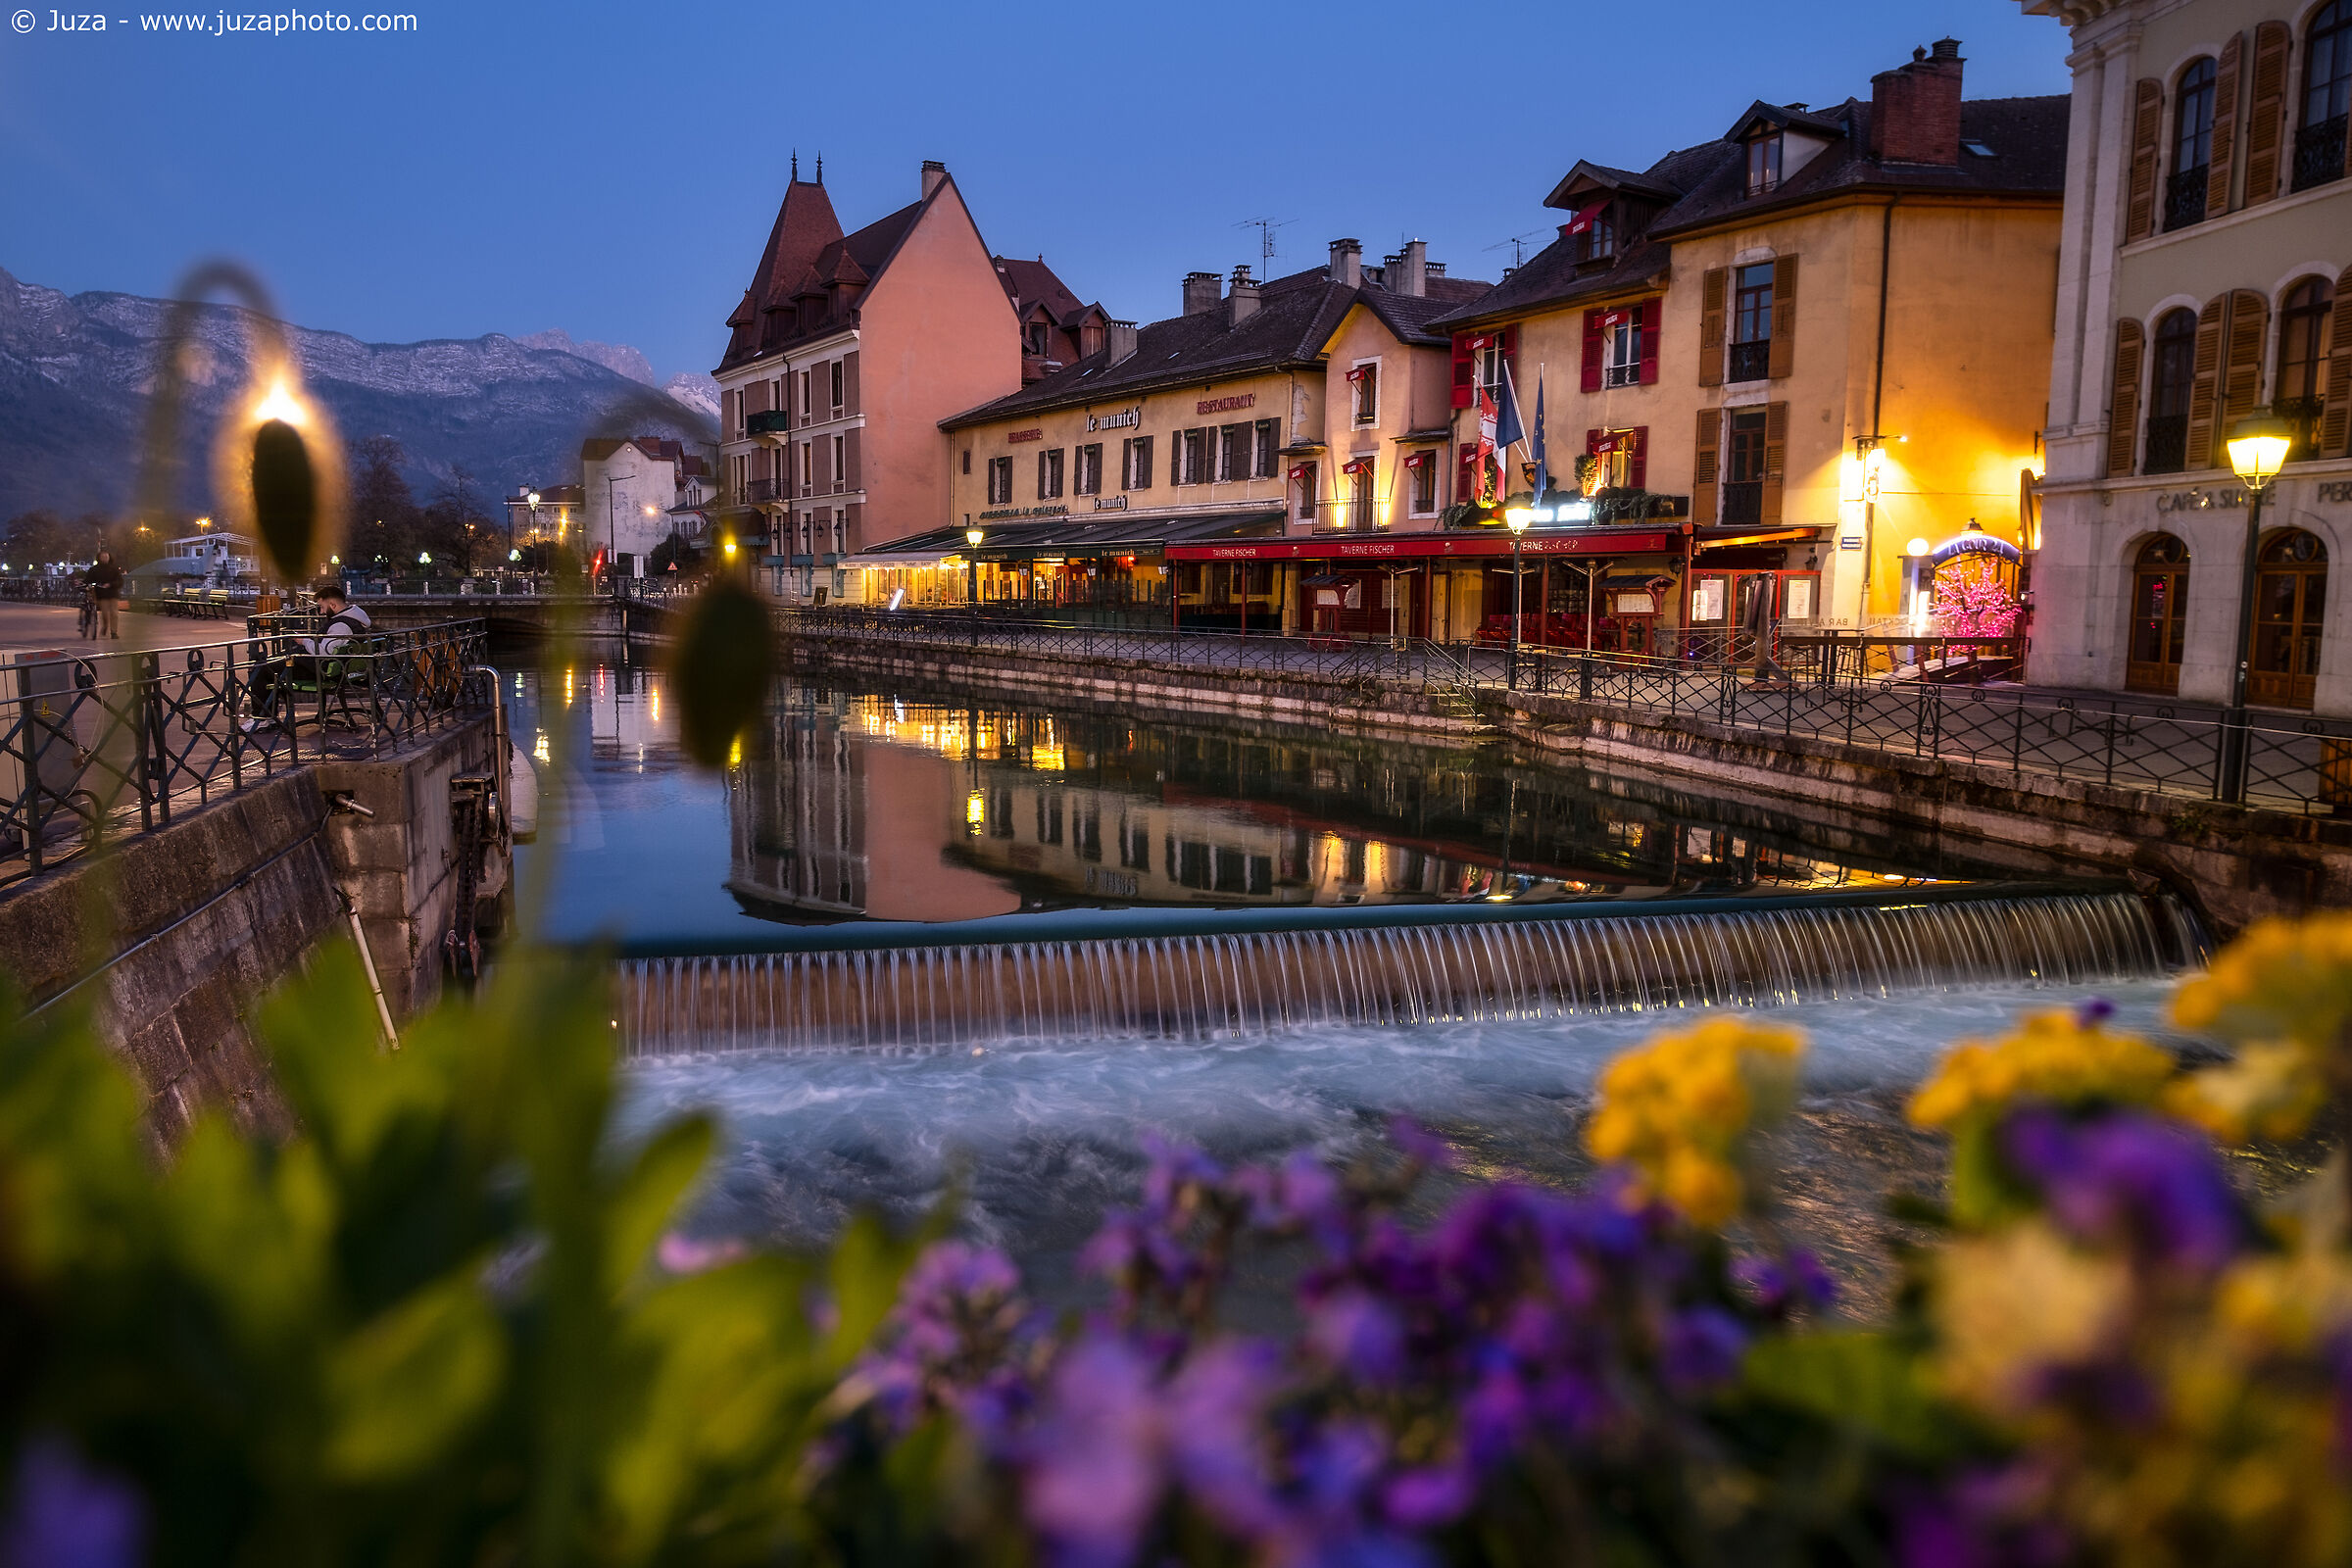 Annecy among the flowers...